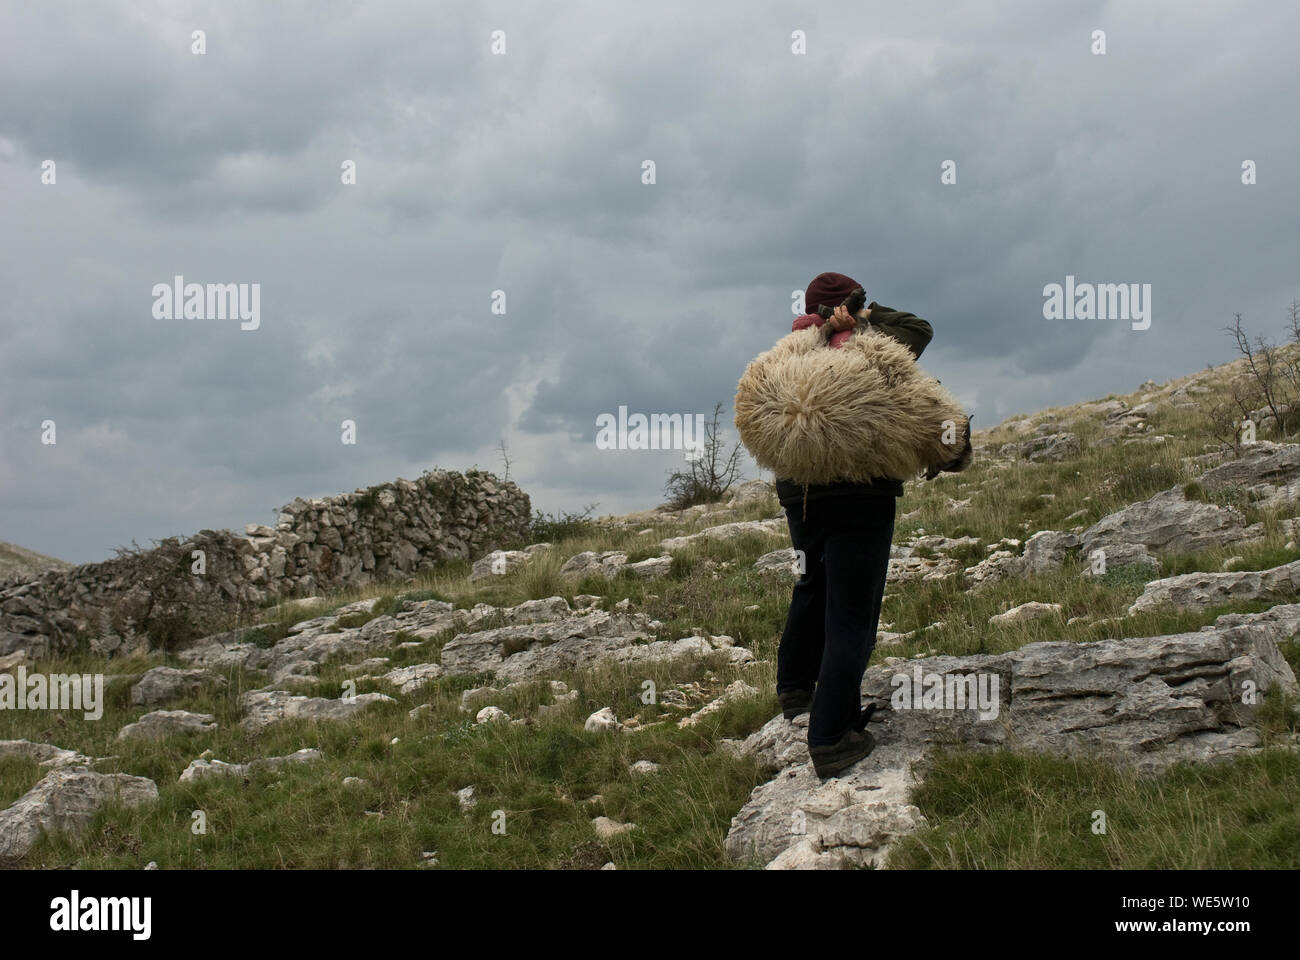 A man on a mountain top carries a sheep on his shoulder. Island of Kornat, Croatia Stock Photo